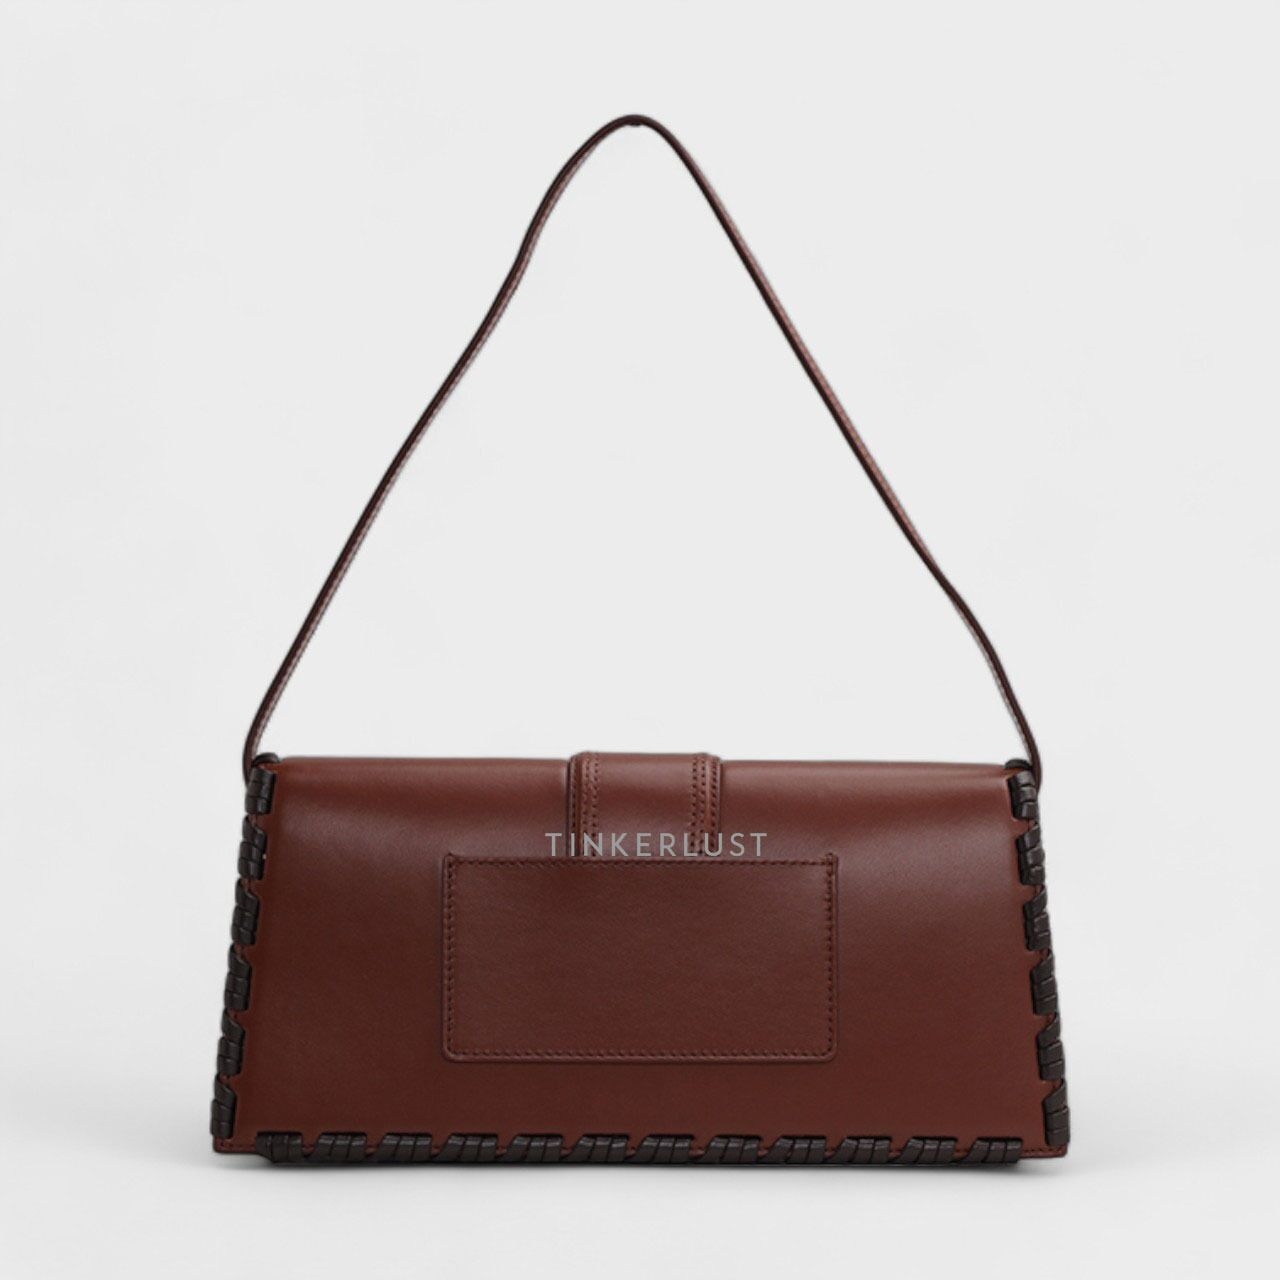 Jacquemust Le Bambino Long Lacet In Brown Smooth Leather Shoulder Bag